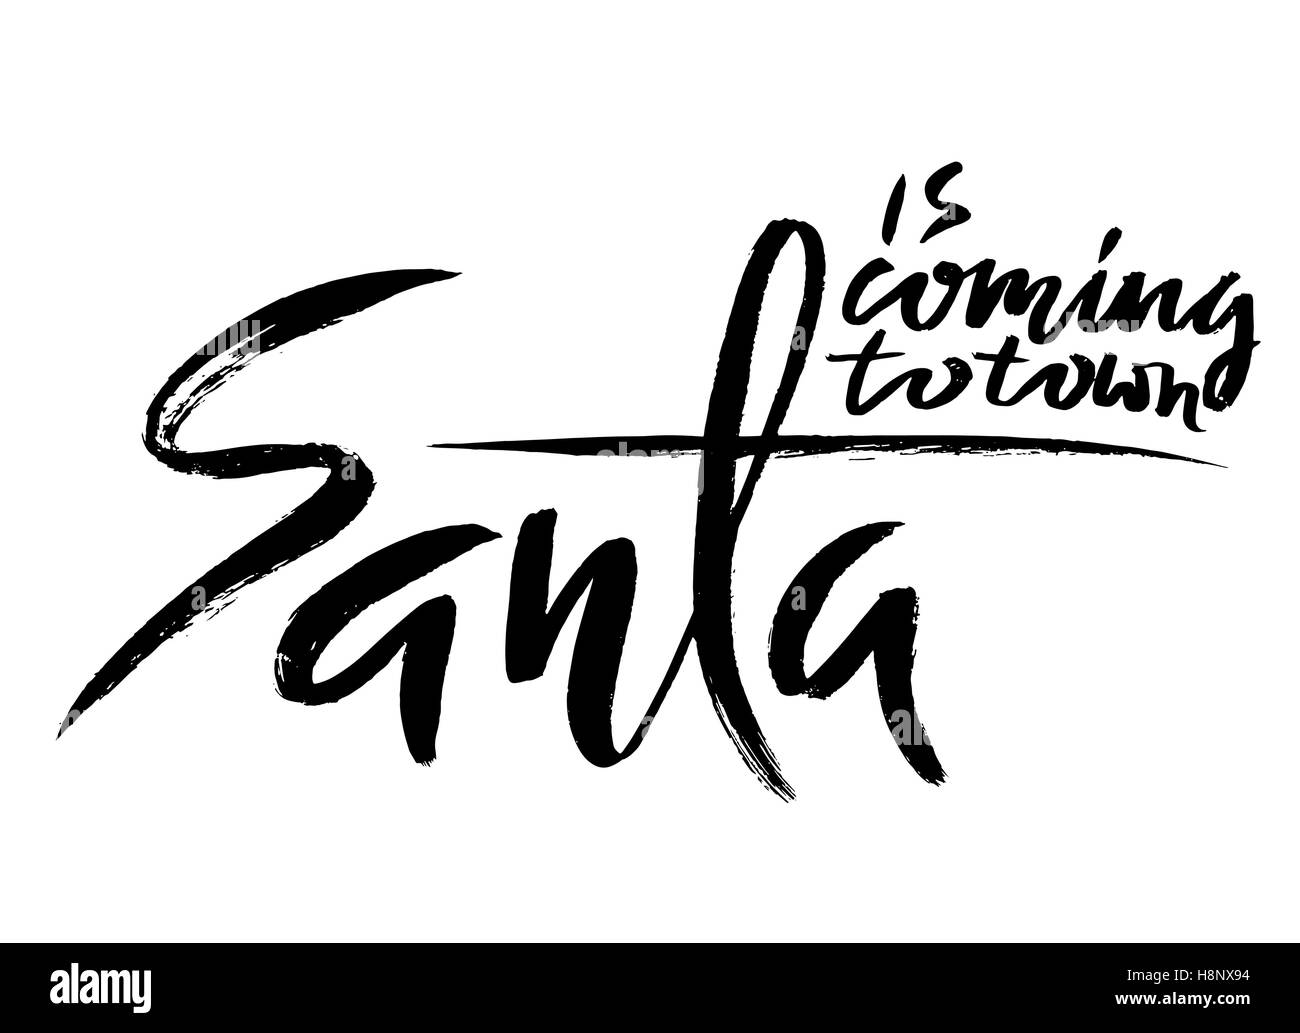 Santa Claus is coming to town hand lettering banner. Artistic design for a logo, greeting cards, invitations, posters, banners, seasonal greetings illustrations. Ink modern brush calligraphy print. Stock Vector